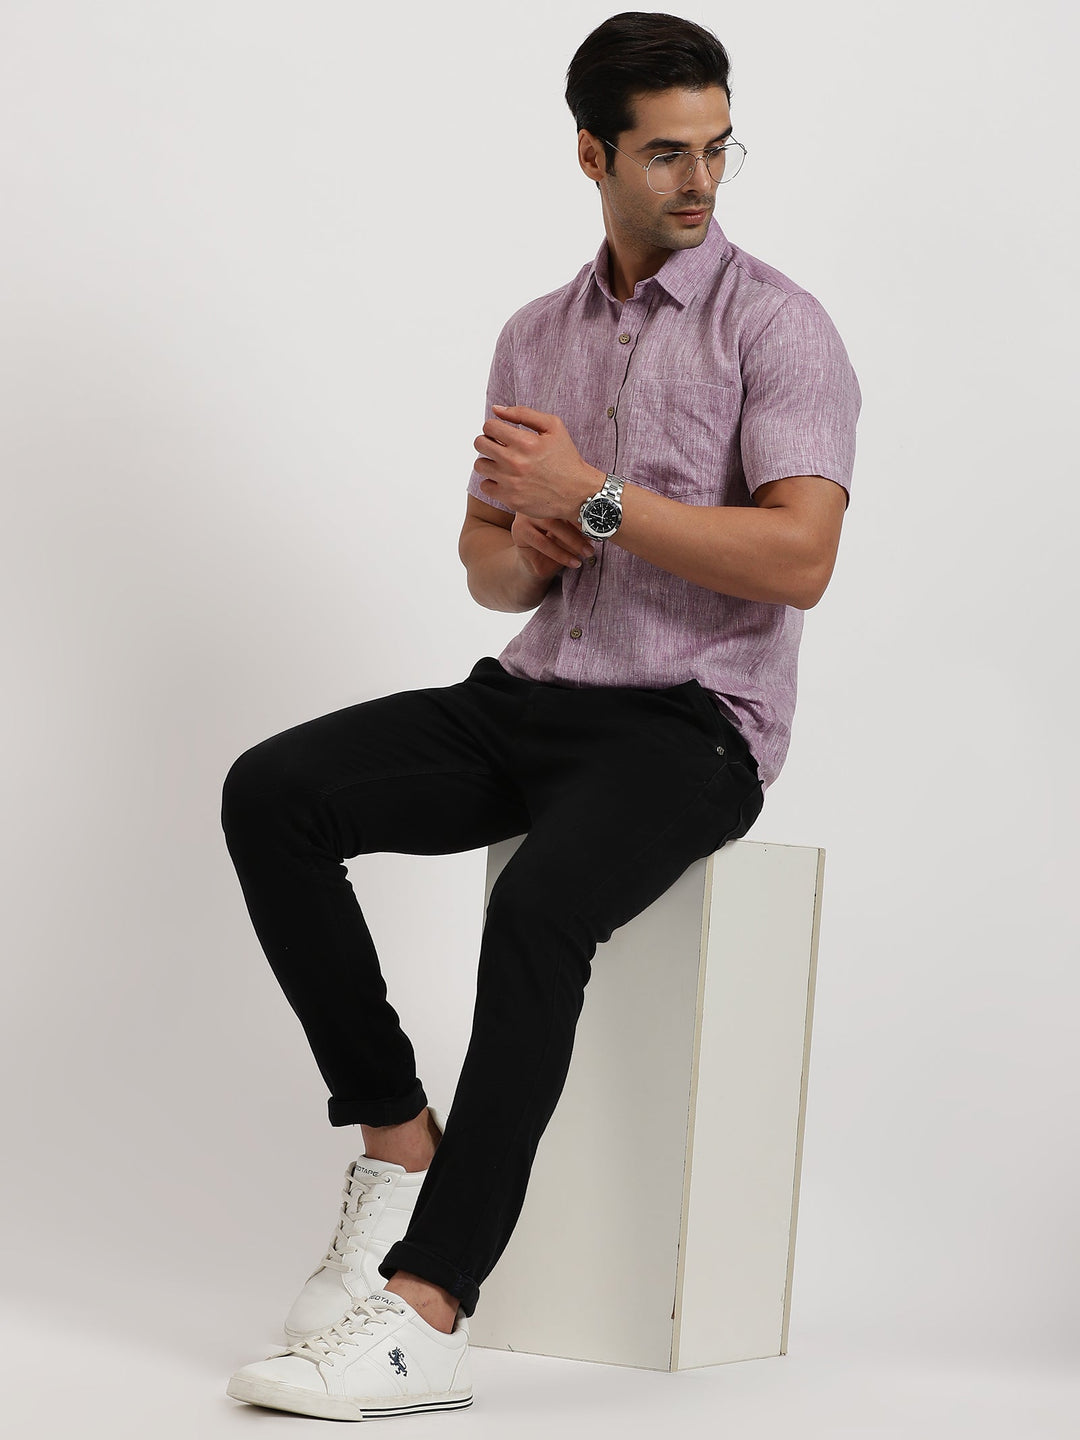 Bryce - Pure Linen Chambray Half Sleeve Shirt - Lilac | Relove